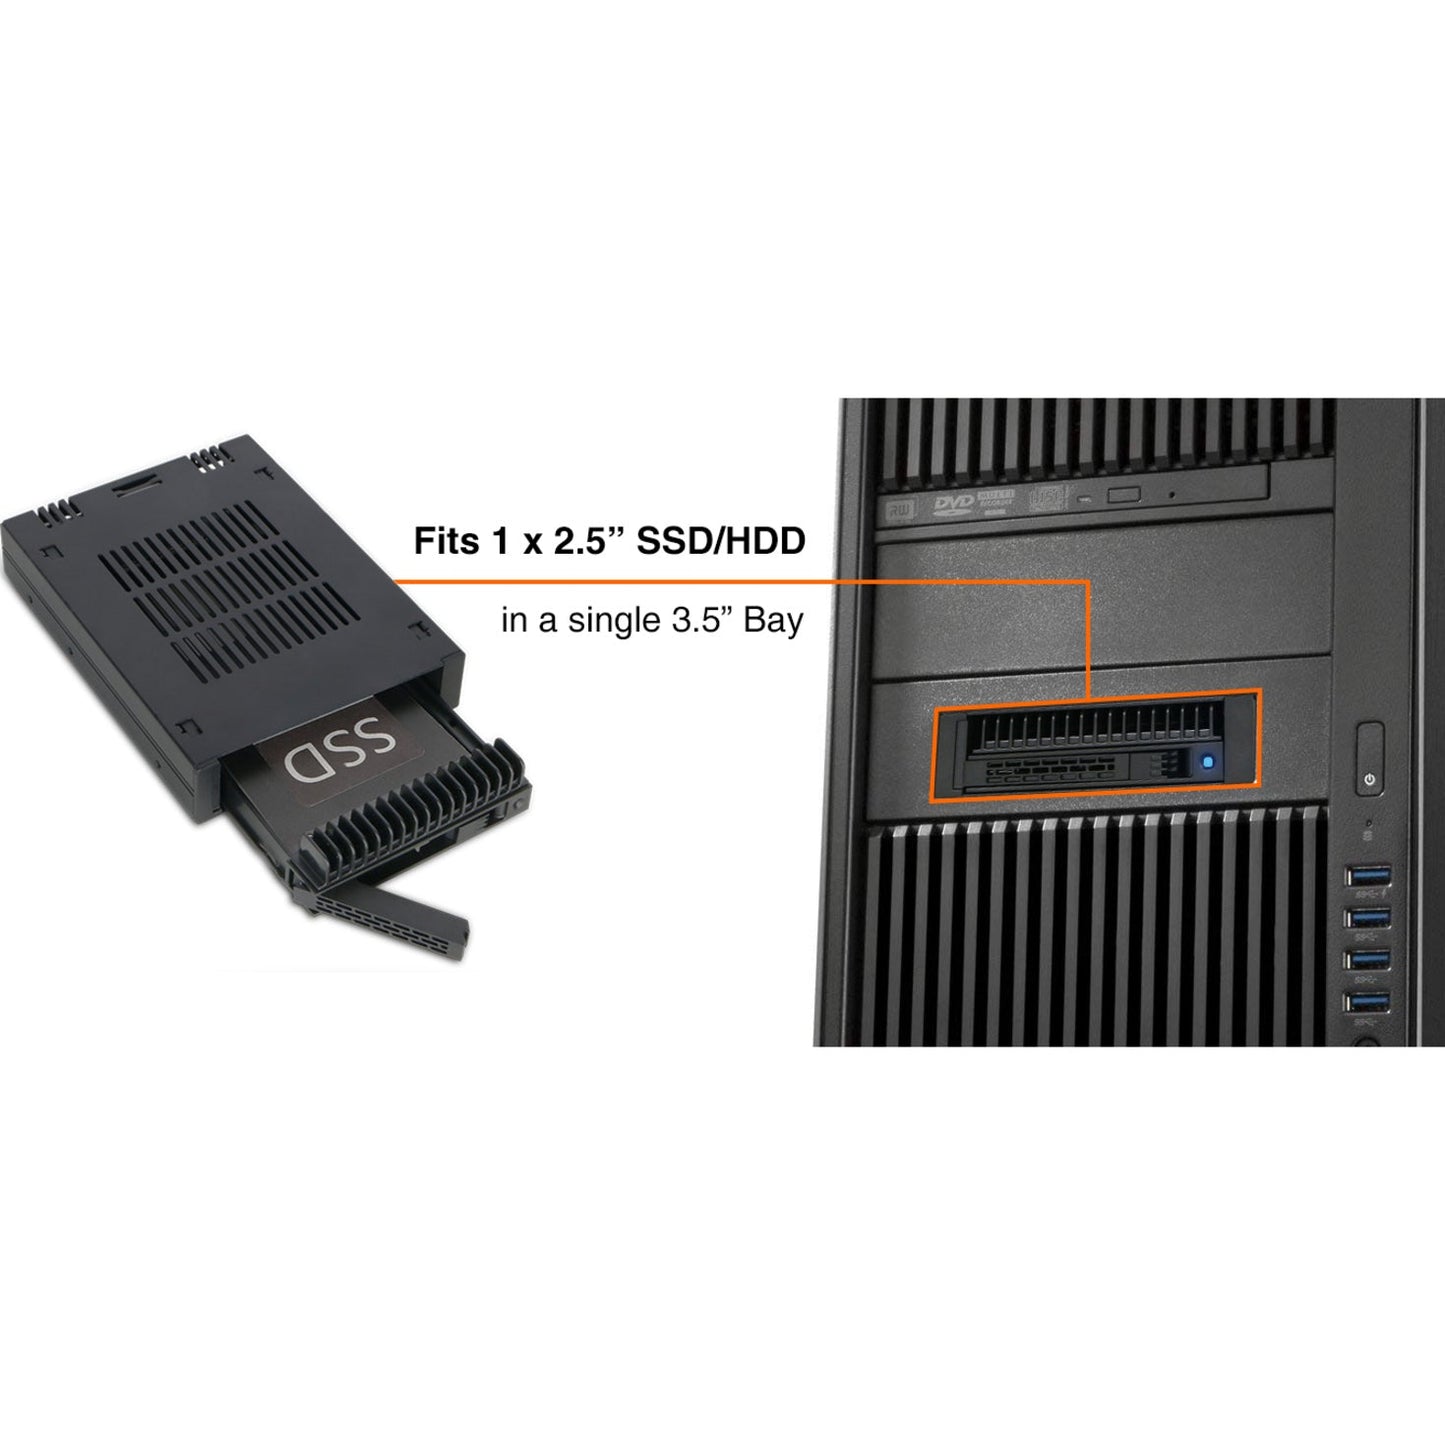 Icy Dock ExpressCage MB741SP-B Drive Bay Adapter for 3.5" - Serial ATA/600 Host Interface Internal - Black